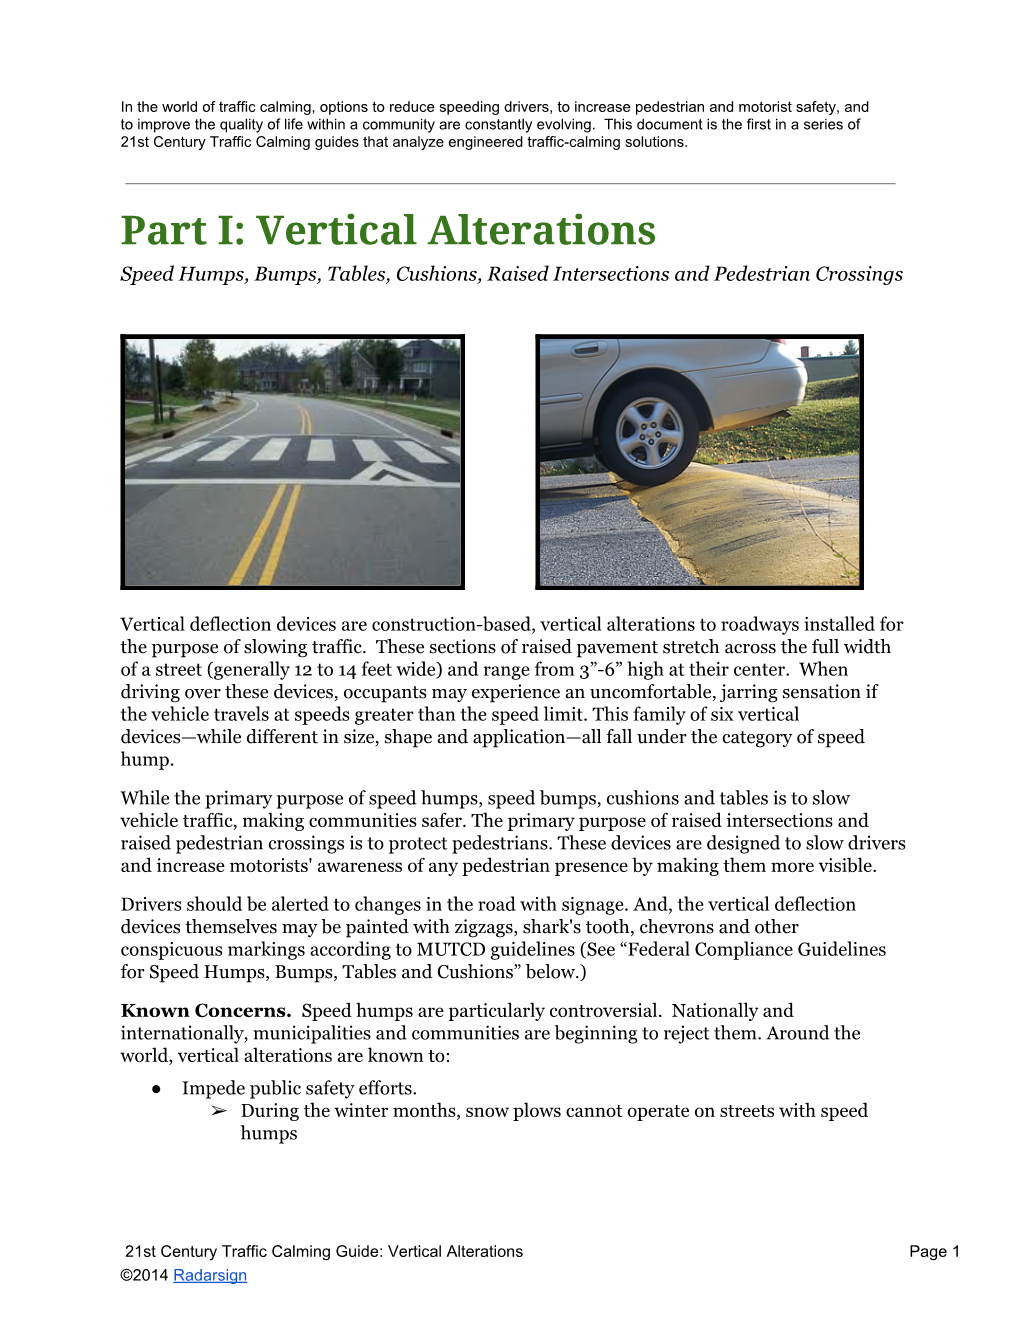 Part I: Vertical Alterations Speed Humps, Bumps, Tables, Cushions, Raised Intersections and Pedestrian Crossings